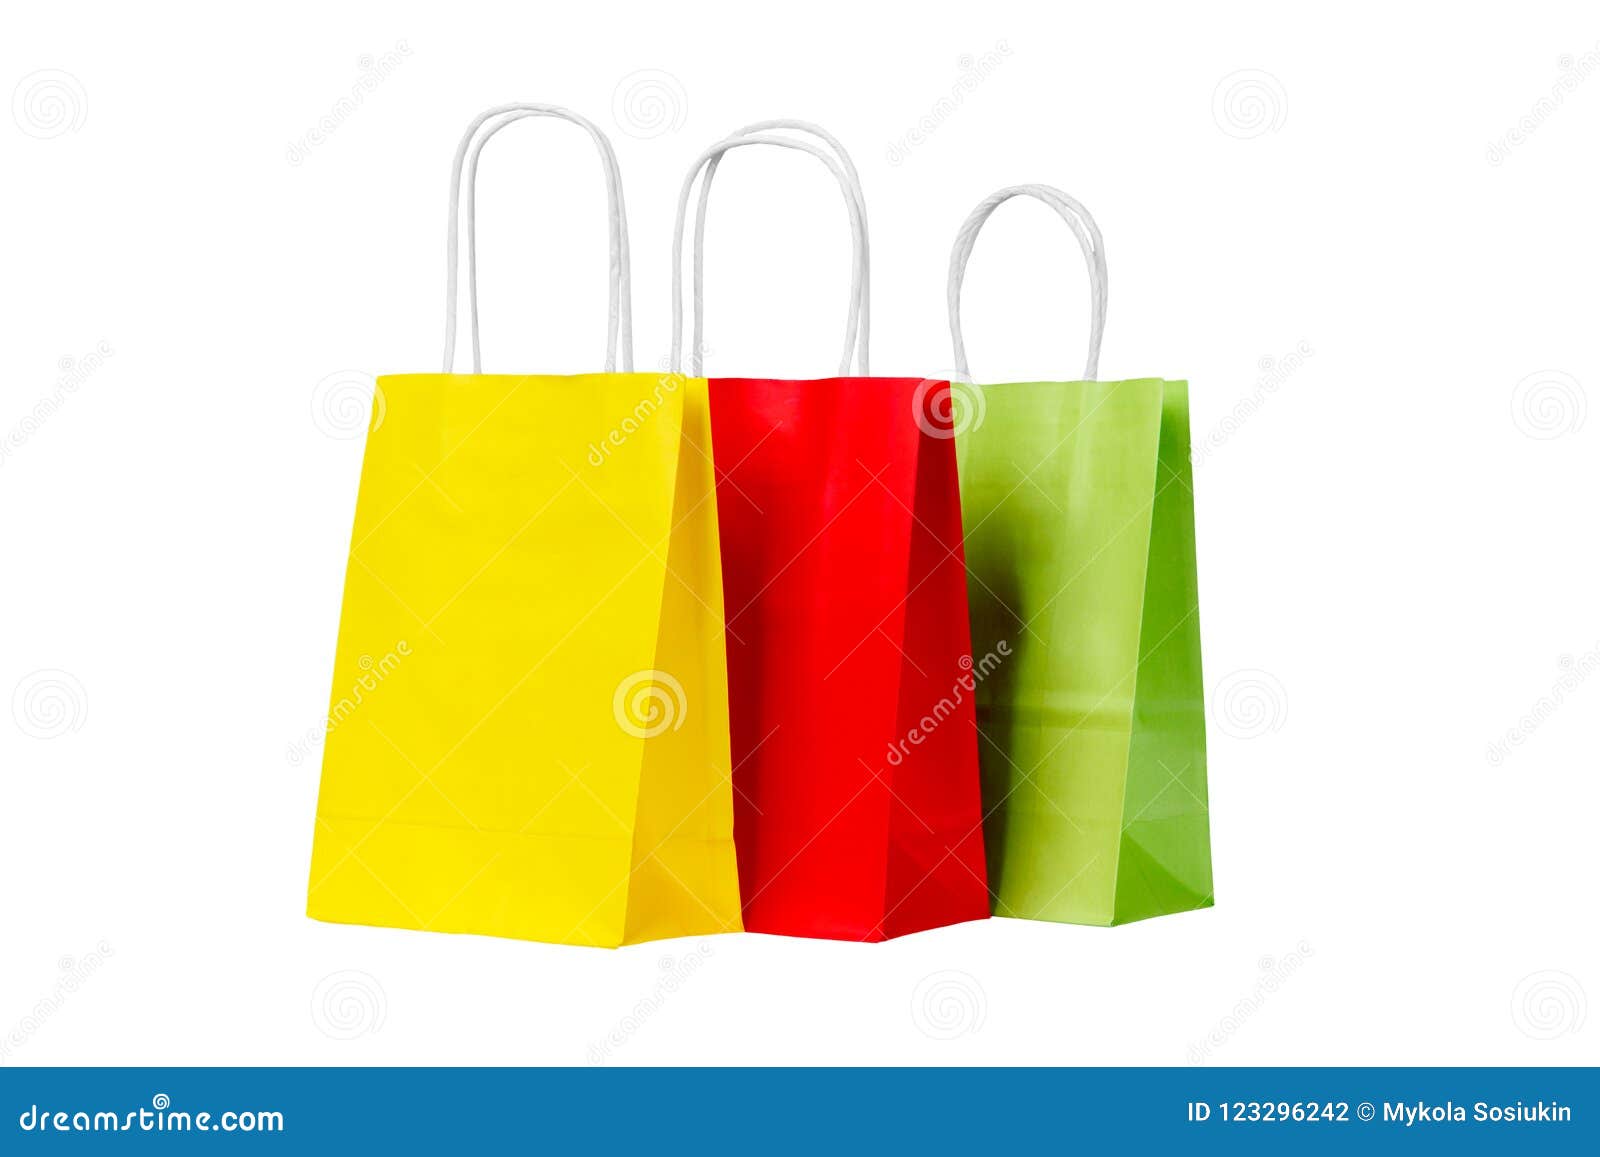 Ecological Recycling Set of Colored Paper Shopping Bags Stock Photo ...